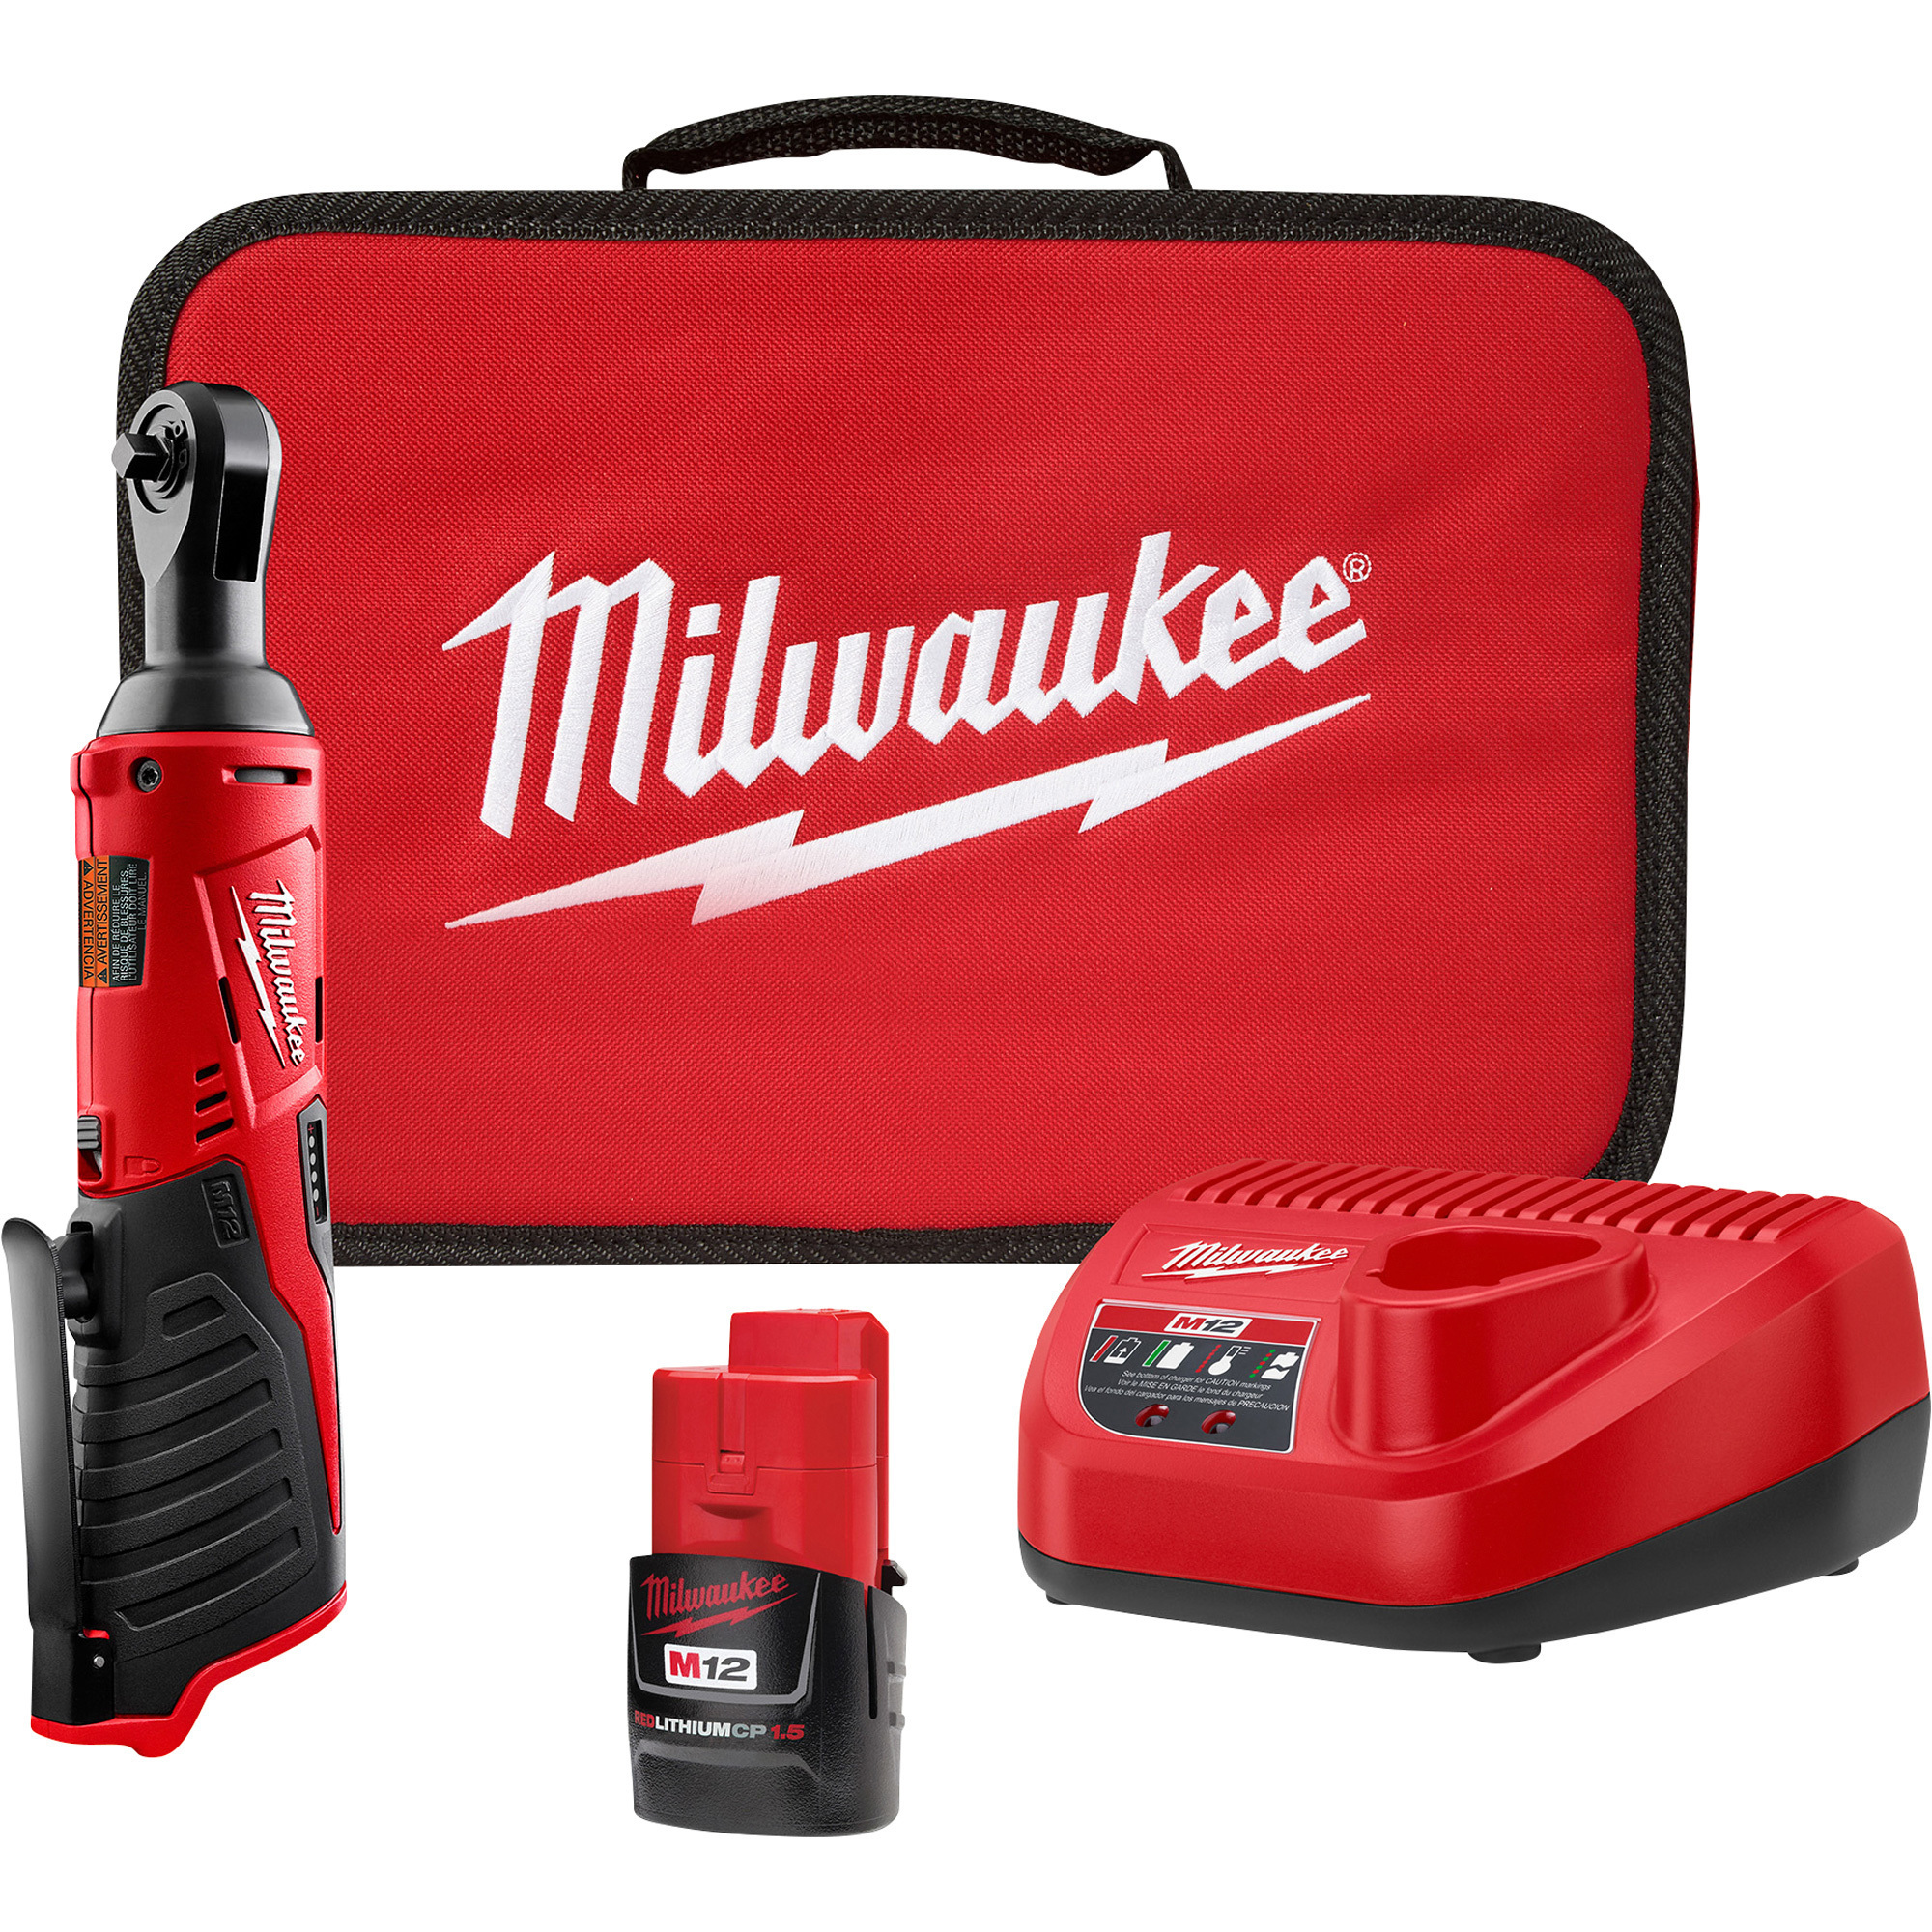 Milwaukee M12 Cordless Electric 3/8in. Ratchet Kit — With Battery, 12 Volt,  Model# 2457-21 Northern Tool